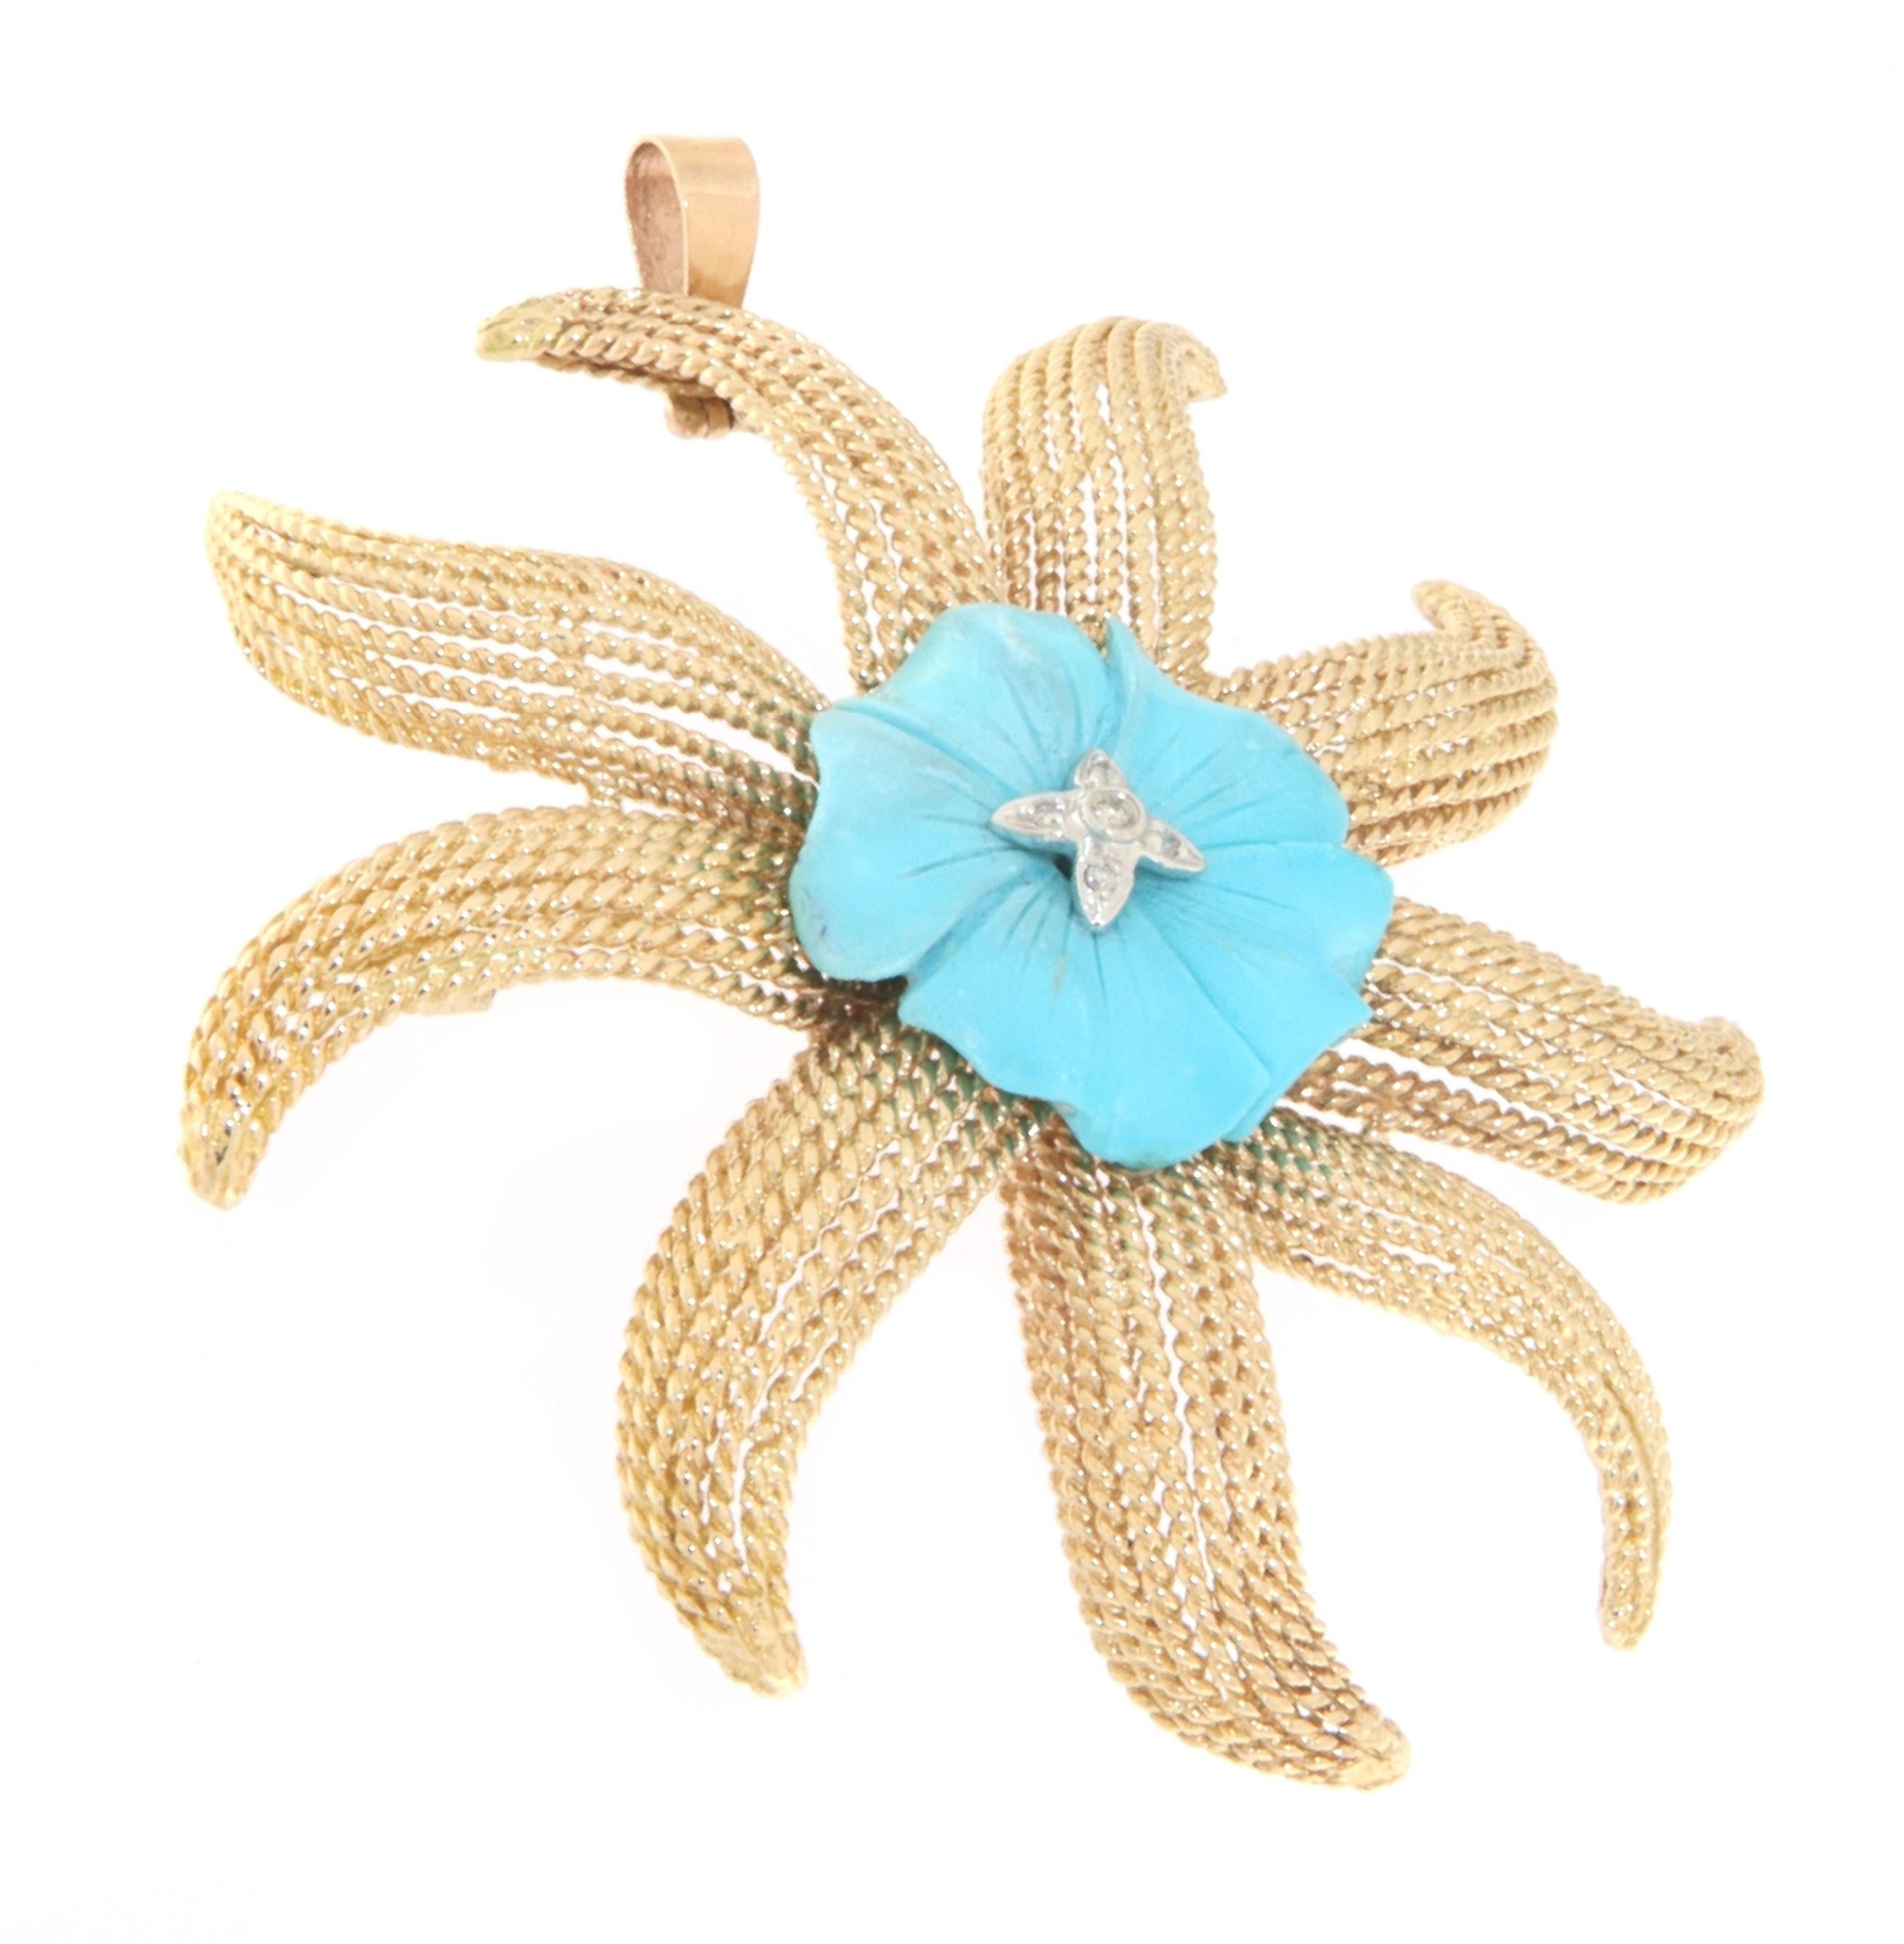 This pendant and brooch combo is a magnificent showcase of fine jewelry craftsmanship, blending the timeless beauty of 14-karat yellow gold with the elegance of the sea. Designed in the shape of a starfish, this piece evokes the tranquility and